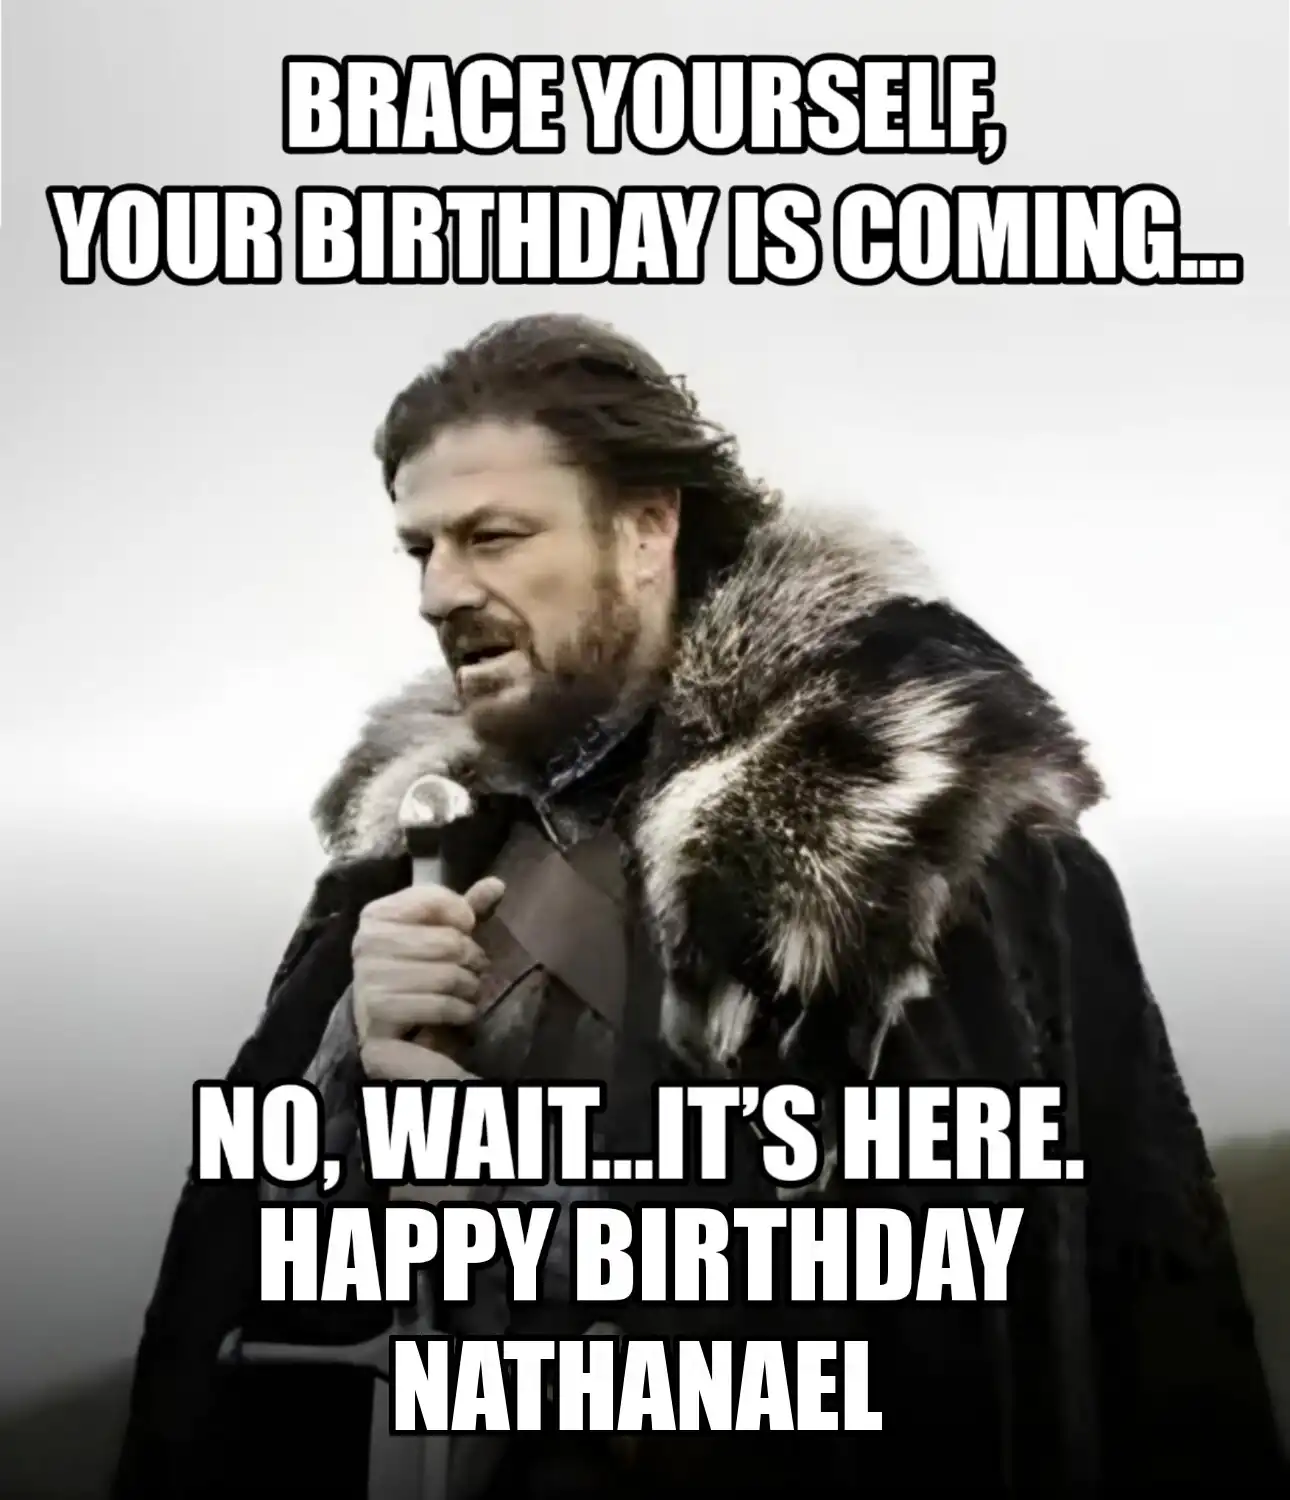 Happy Birthday Nathanael Brace Yourself Your Birthday Is Coming Meme